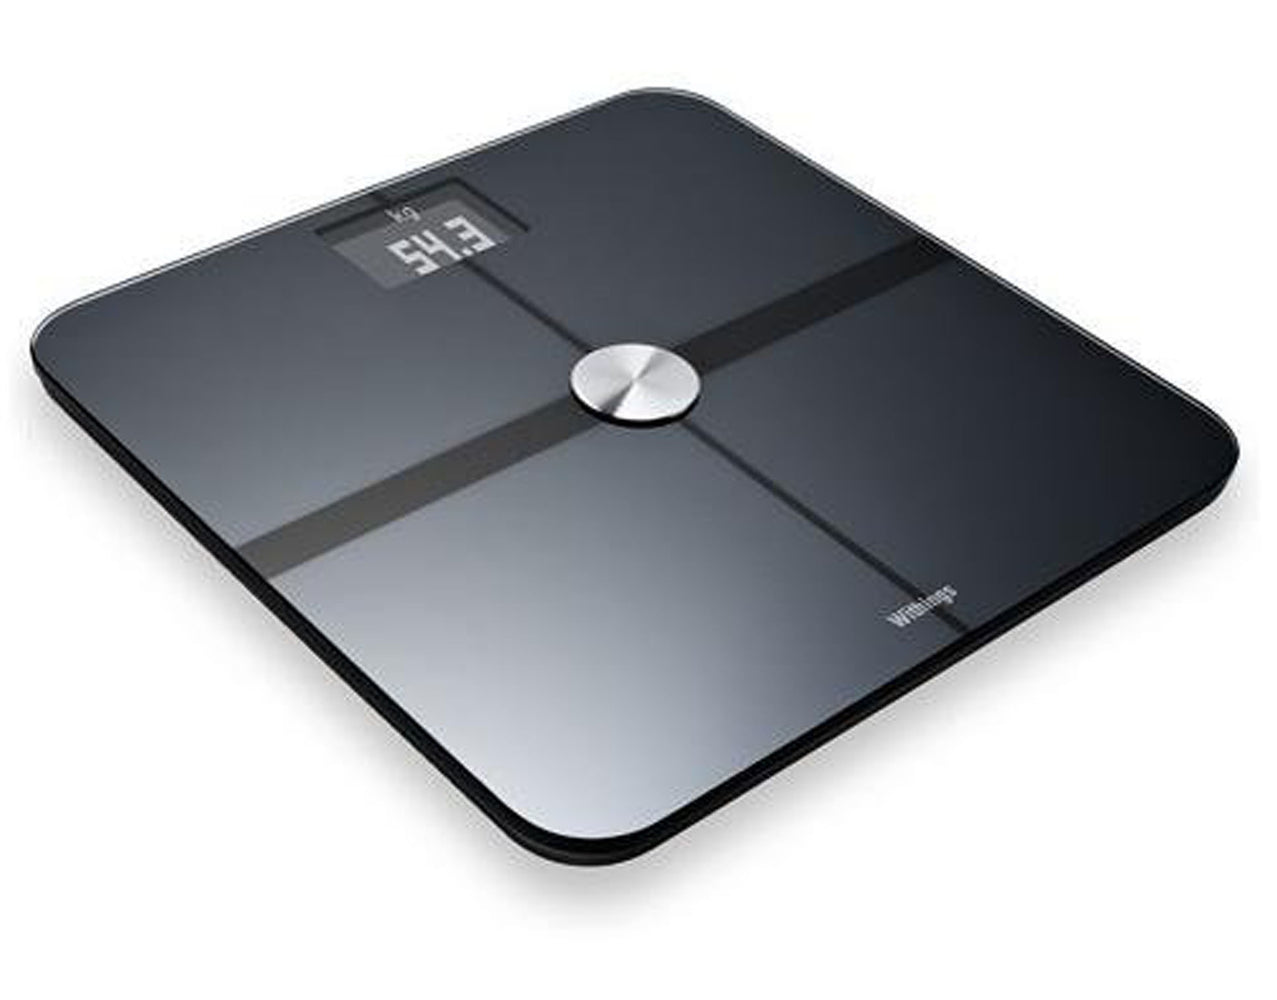 Withings Smart Body Analyser